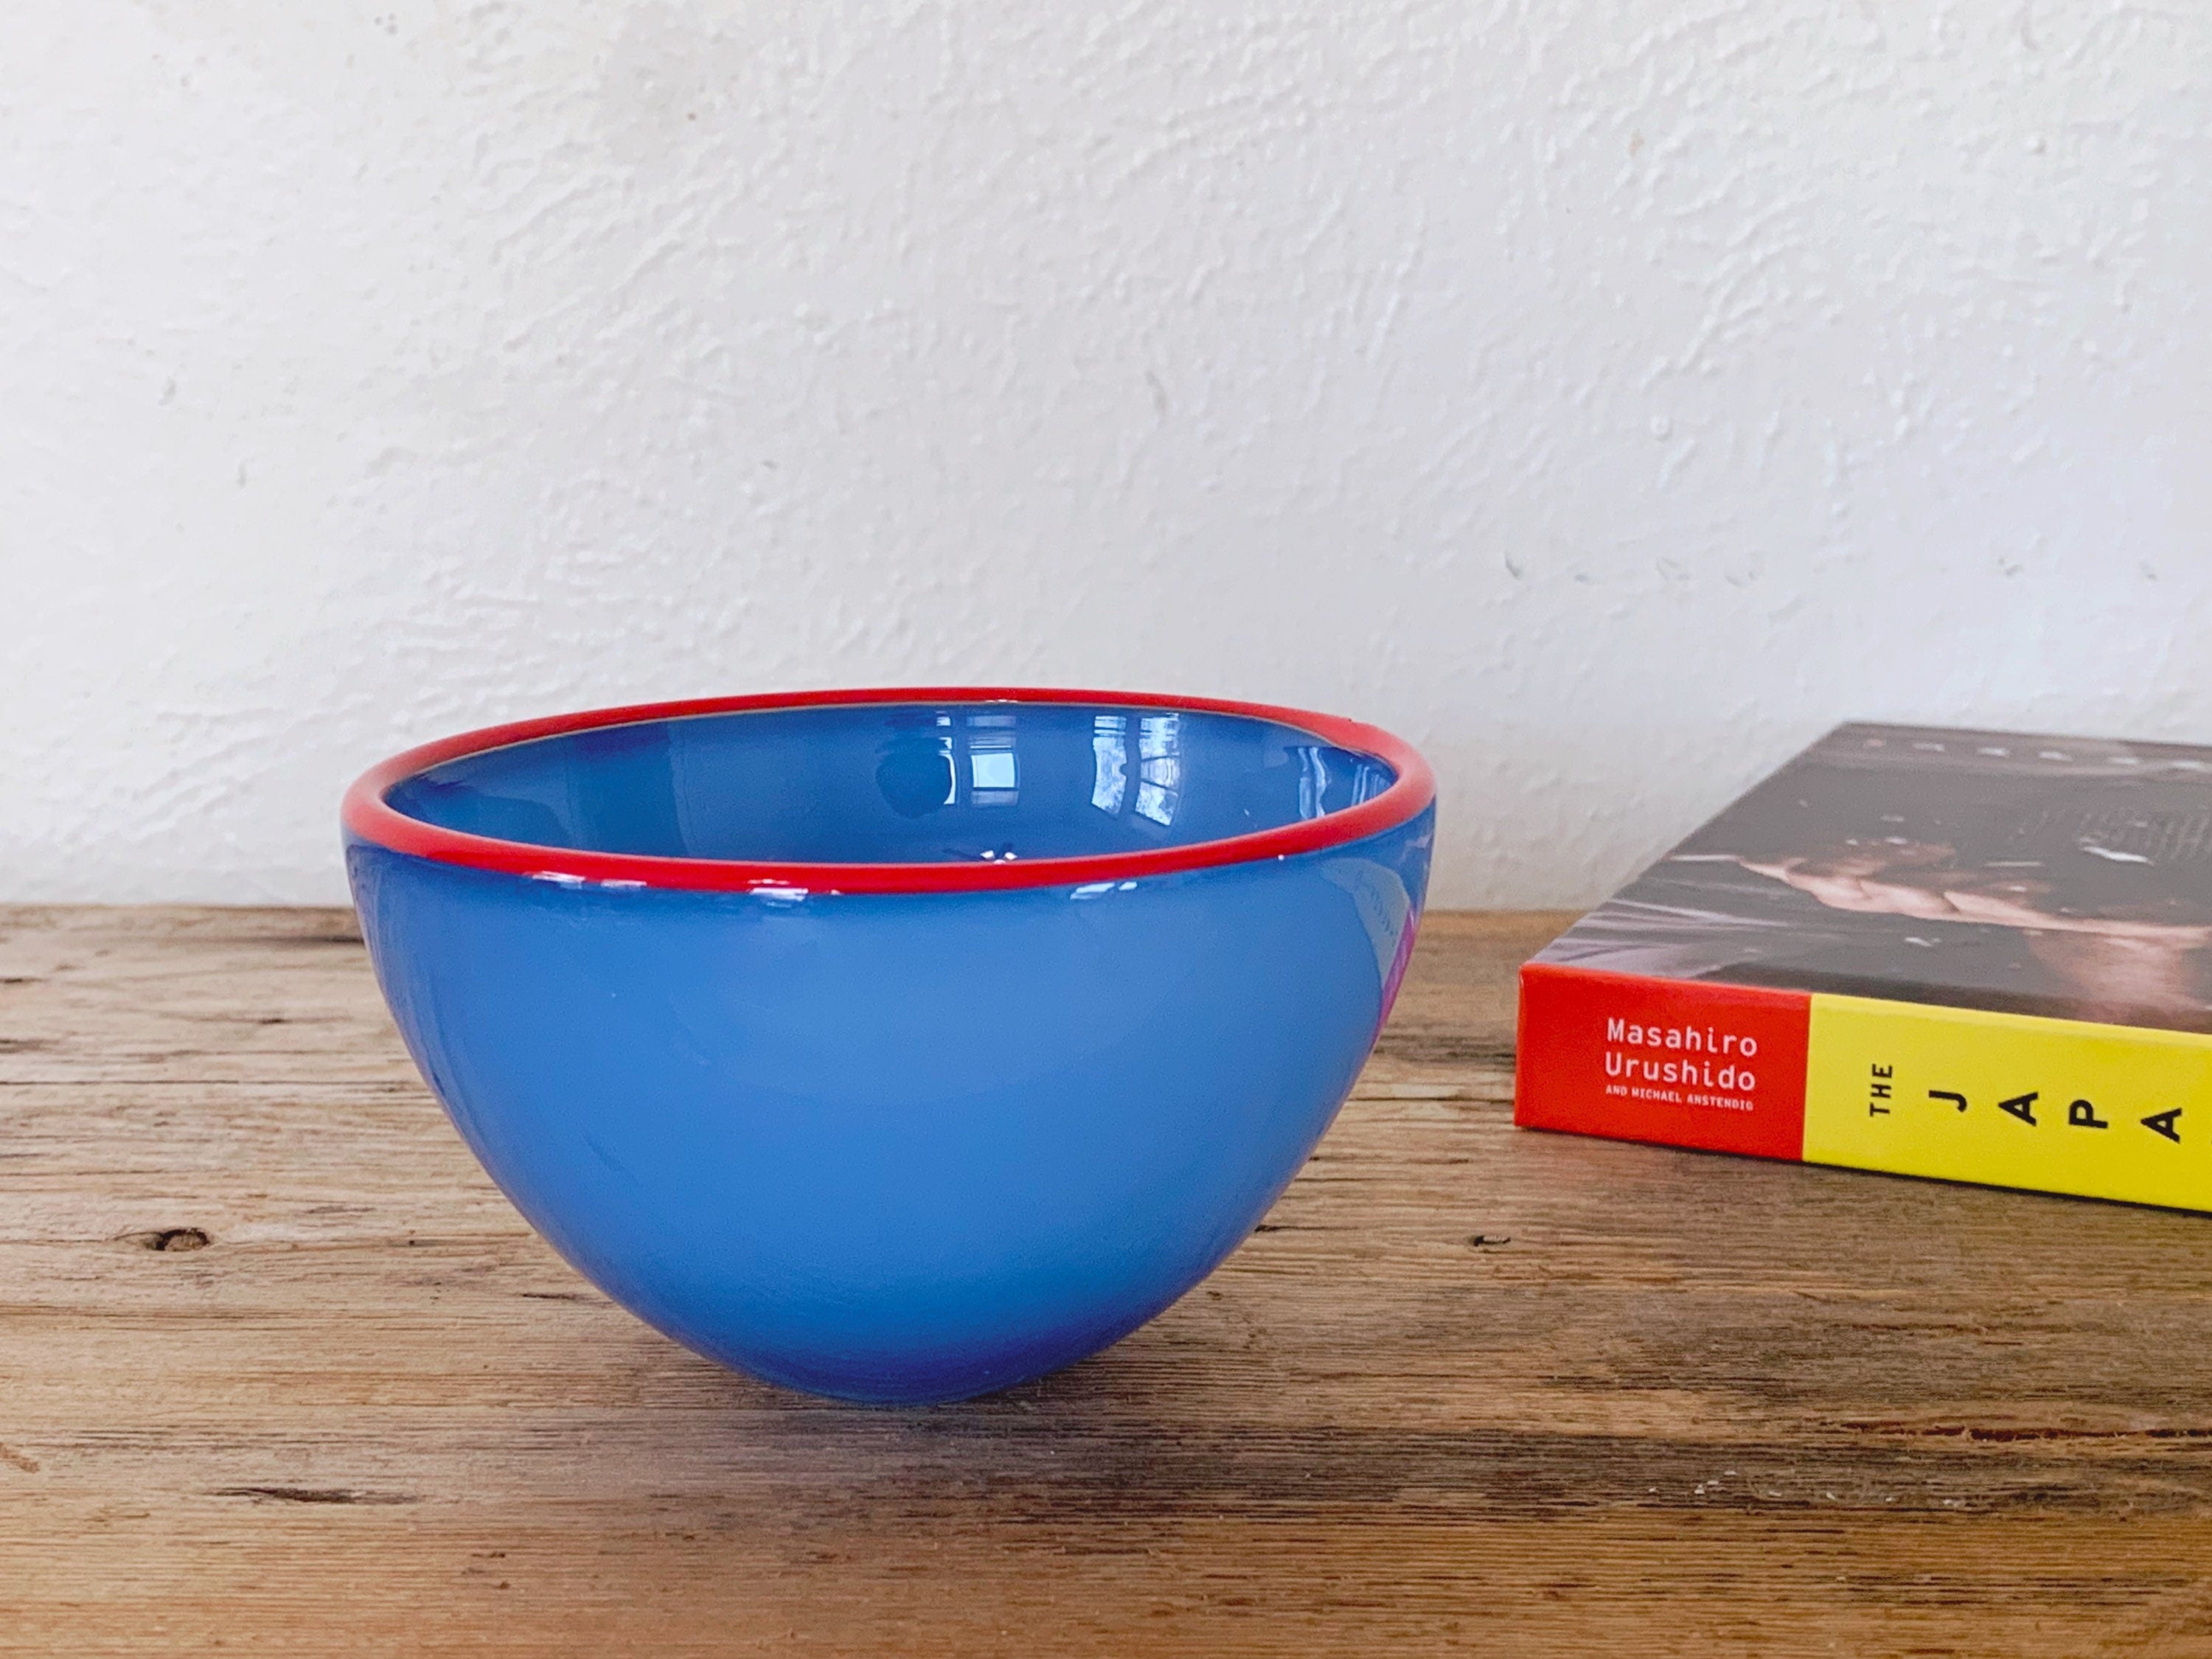 Vintage Studio Art Glass Bowl in Blue with Red Rim | Hand Made Candy Bowl Nut Bowl | Modern Decorative Art